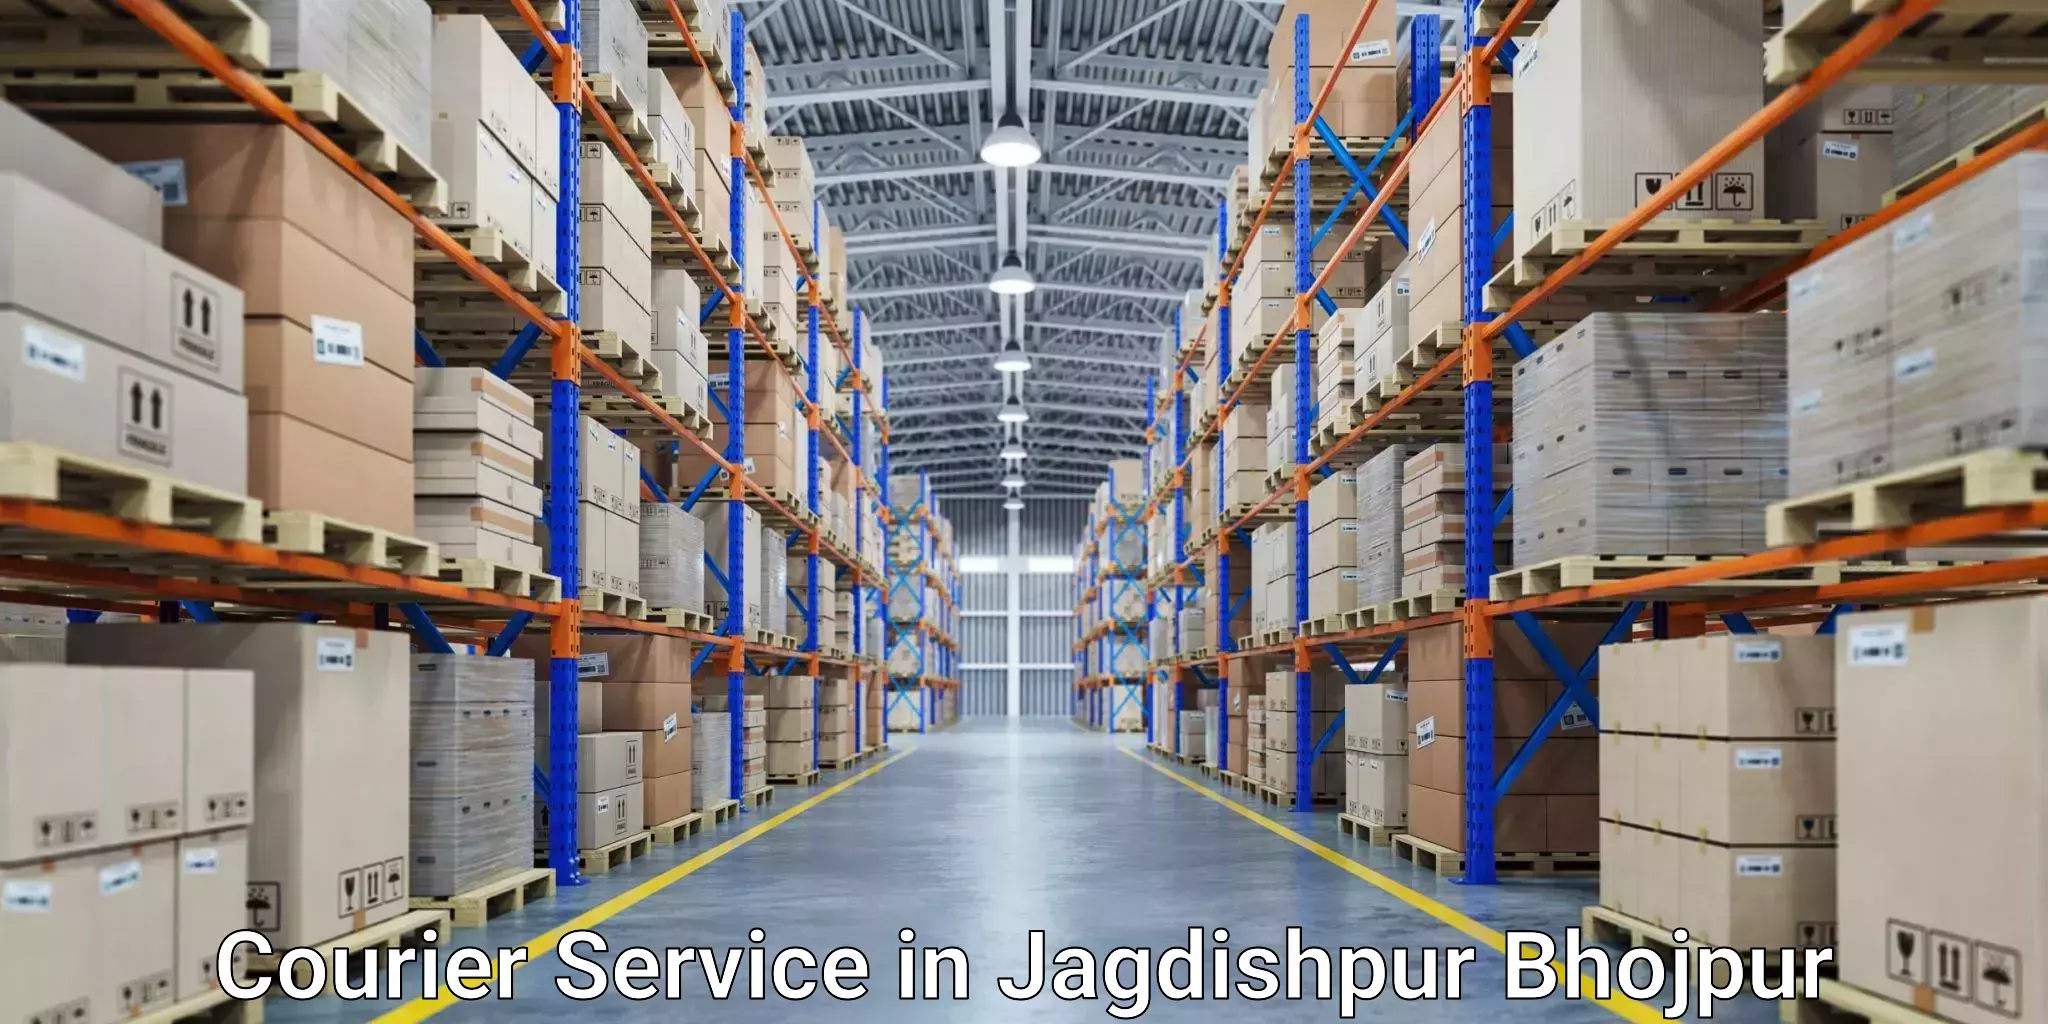 Sustainable shipping practices in Jagdishpur Bhojpur